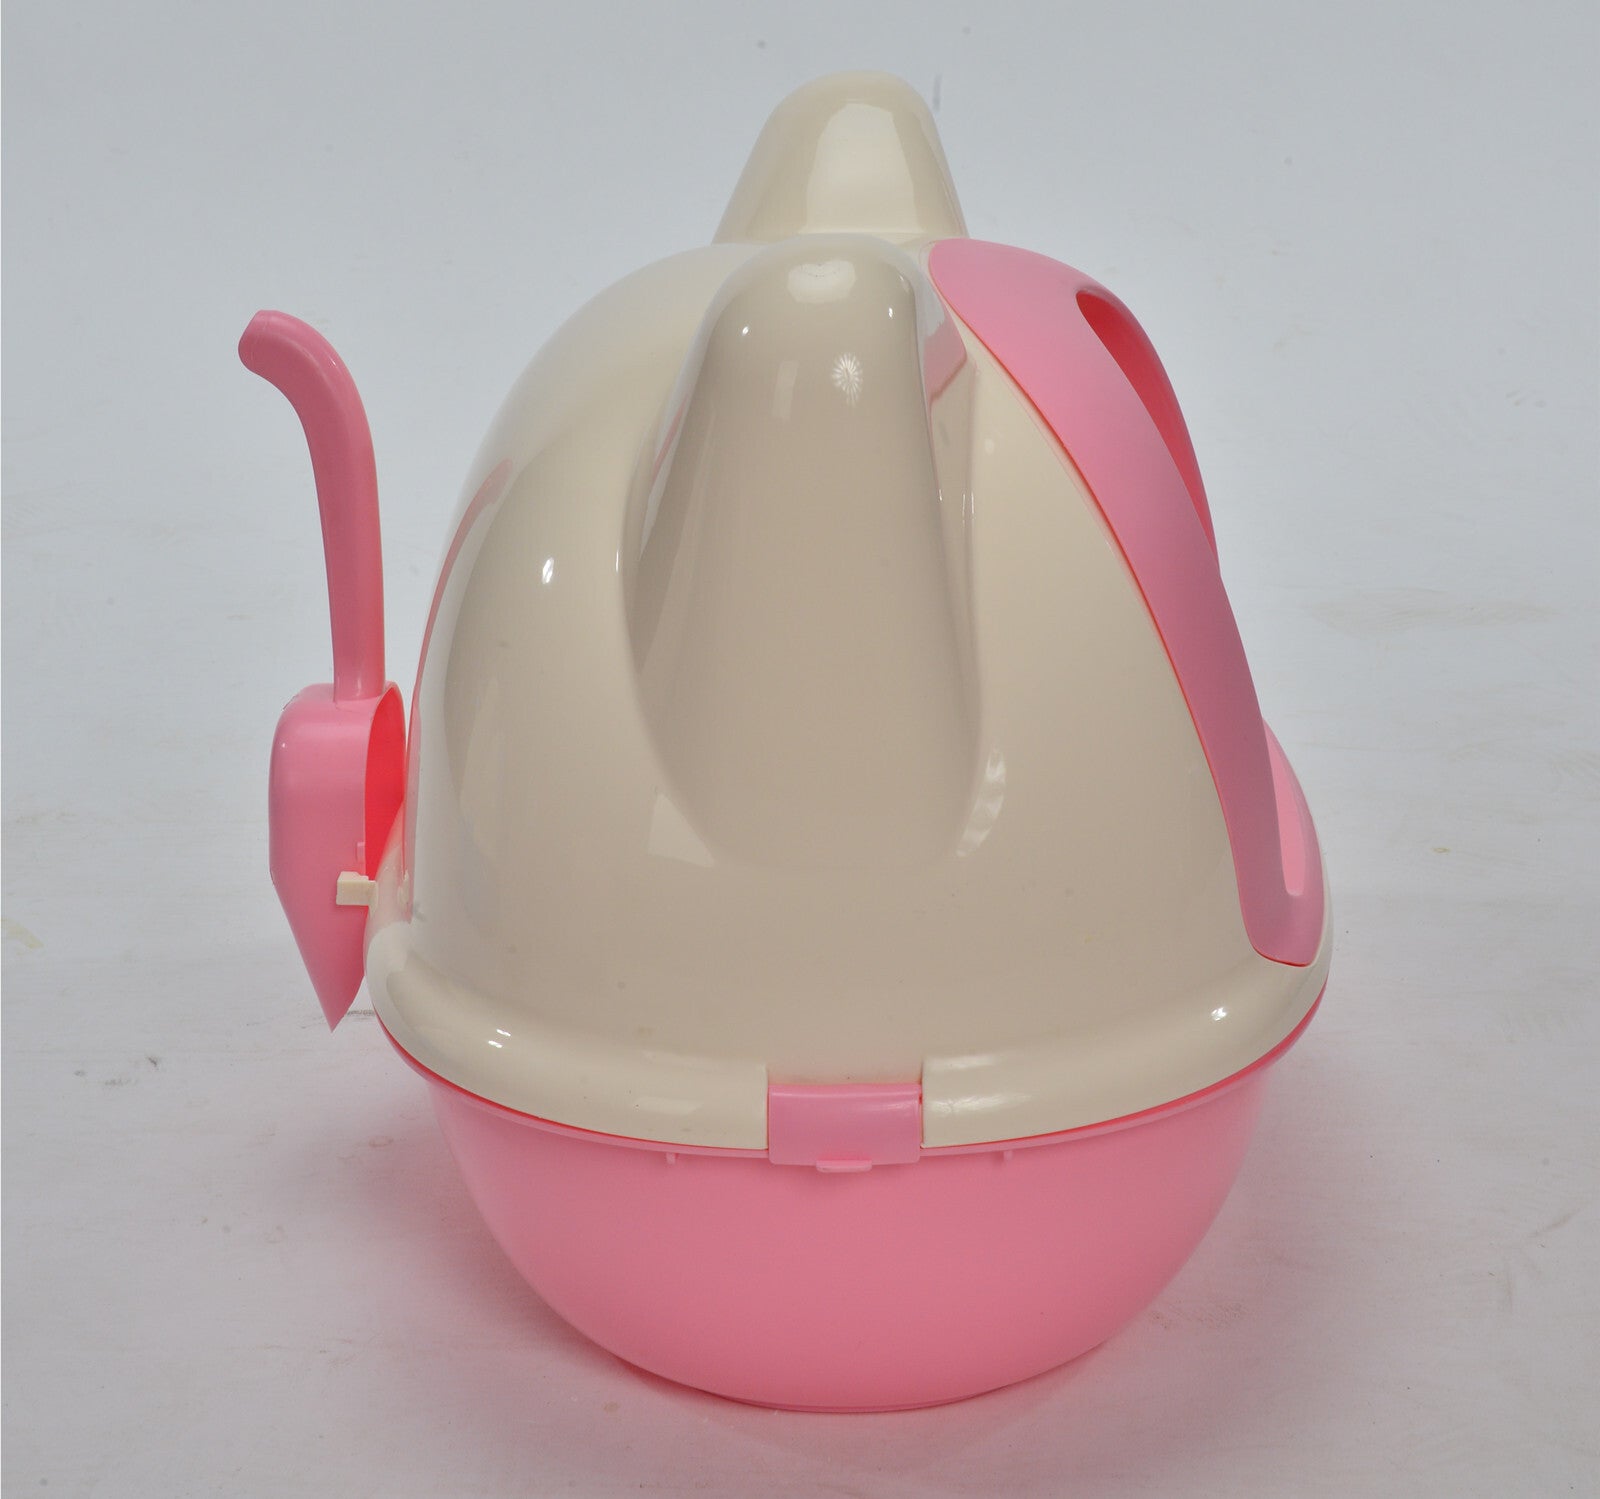 Large Hooded Cat Toilet Litter Box Tray House With Scoop Pink